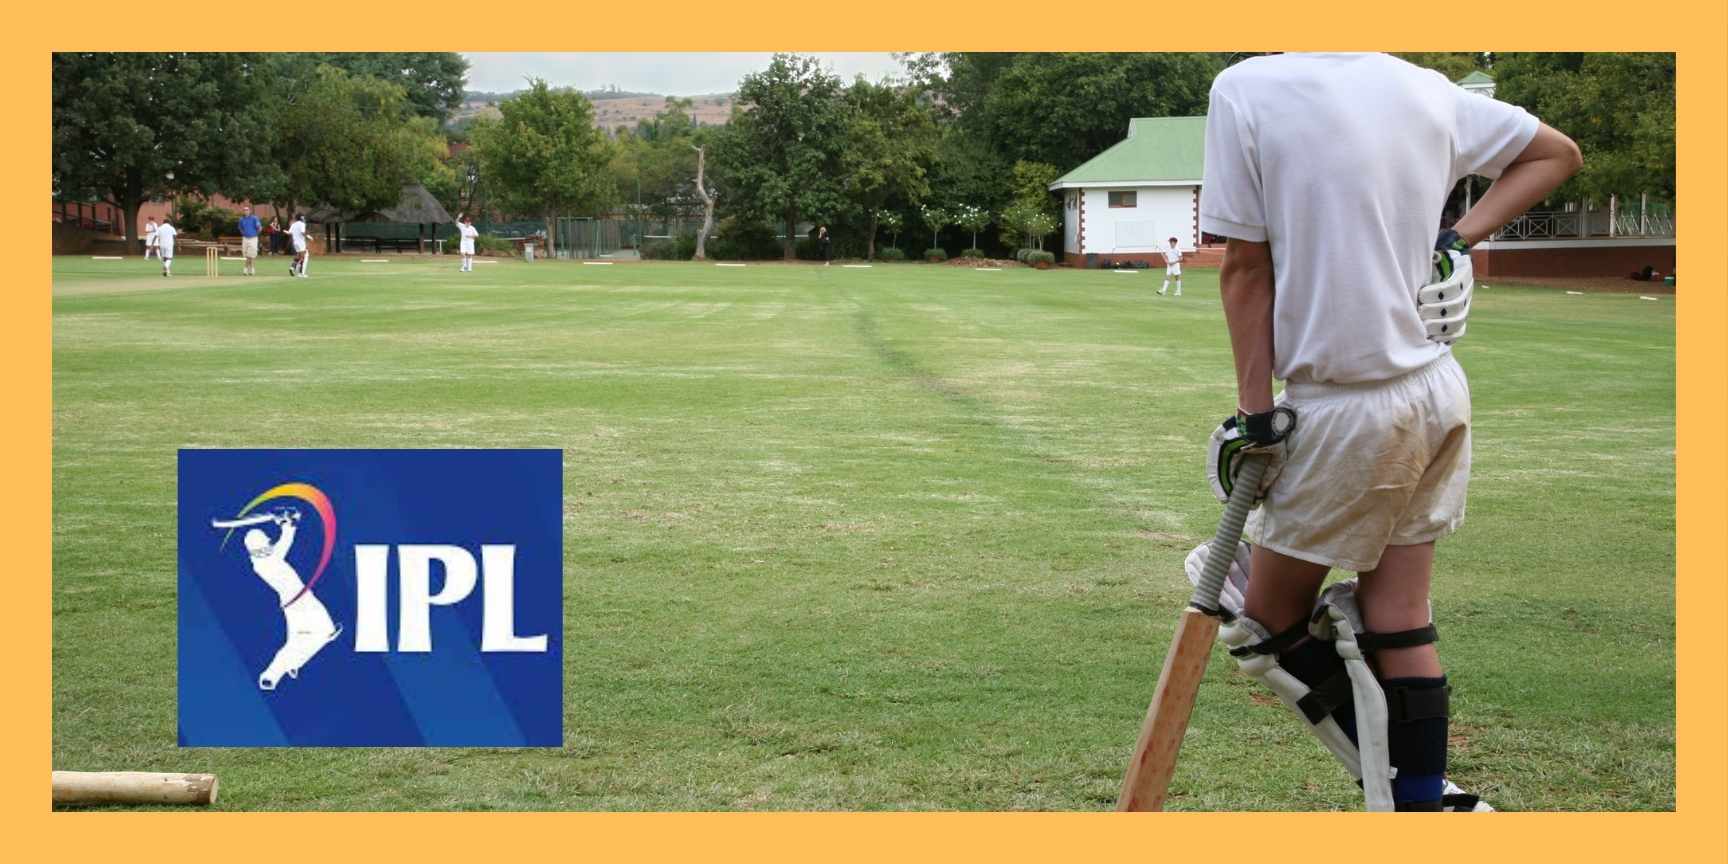 How did IPL help young cricketers succeed?